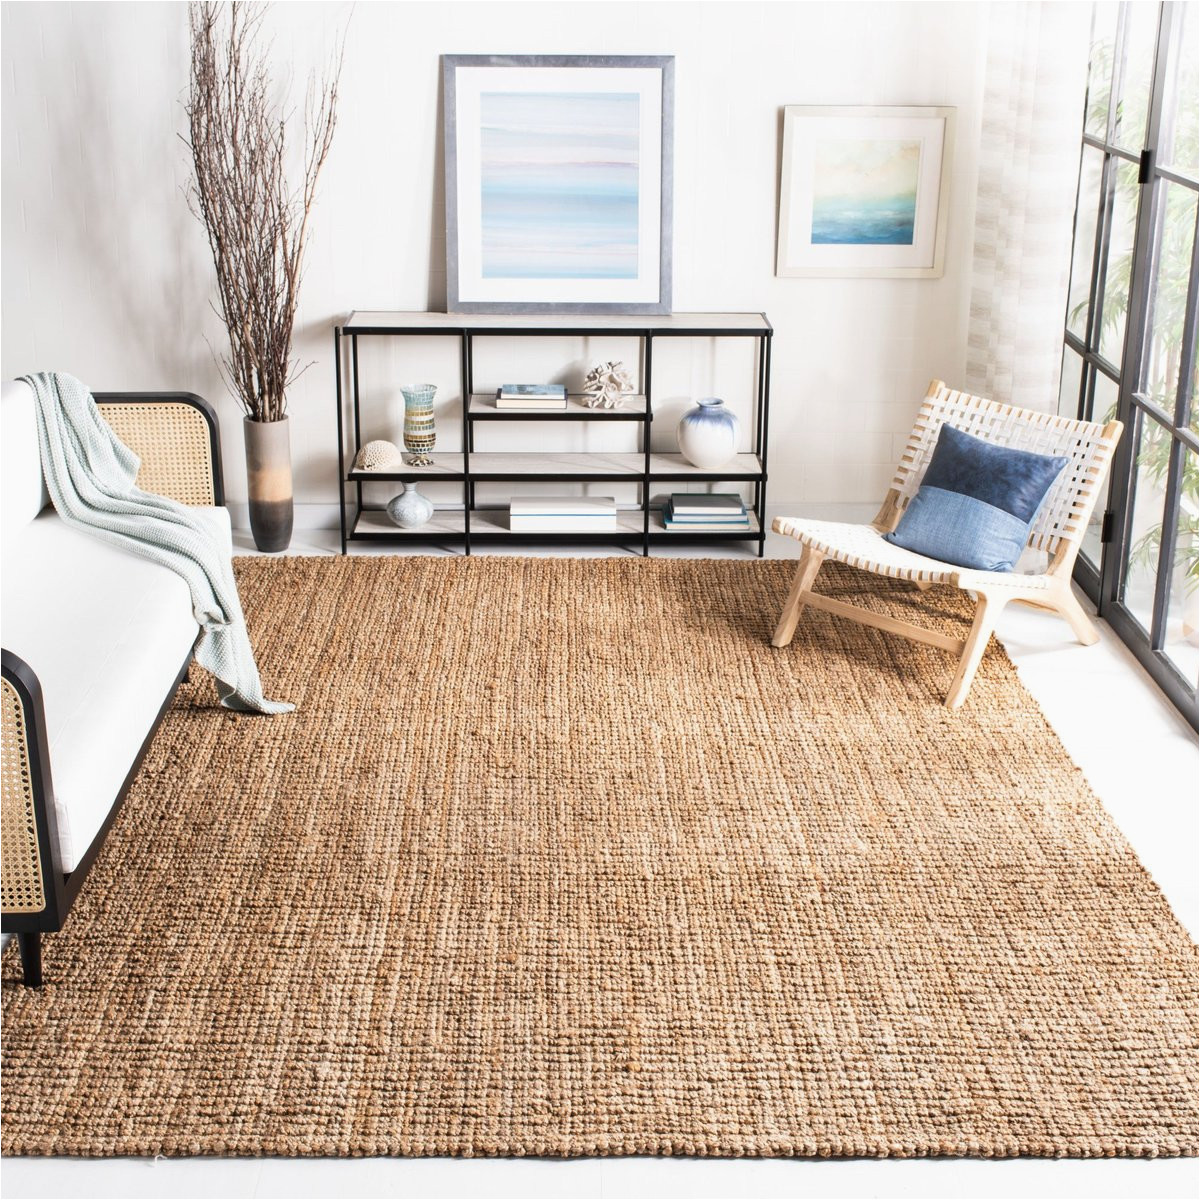 Best Natural Fiber Rug for High Traffic areas Safavieh Natural Fiber Nf-447a Rugs Rugs Direct